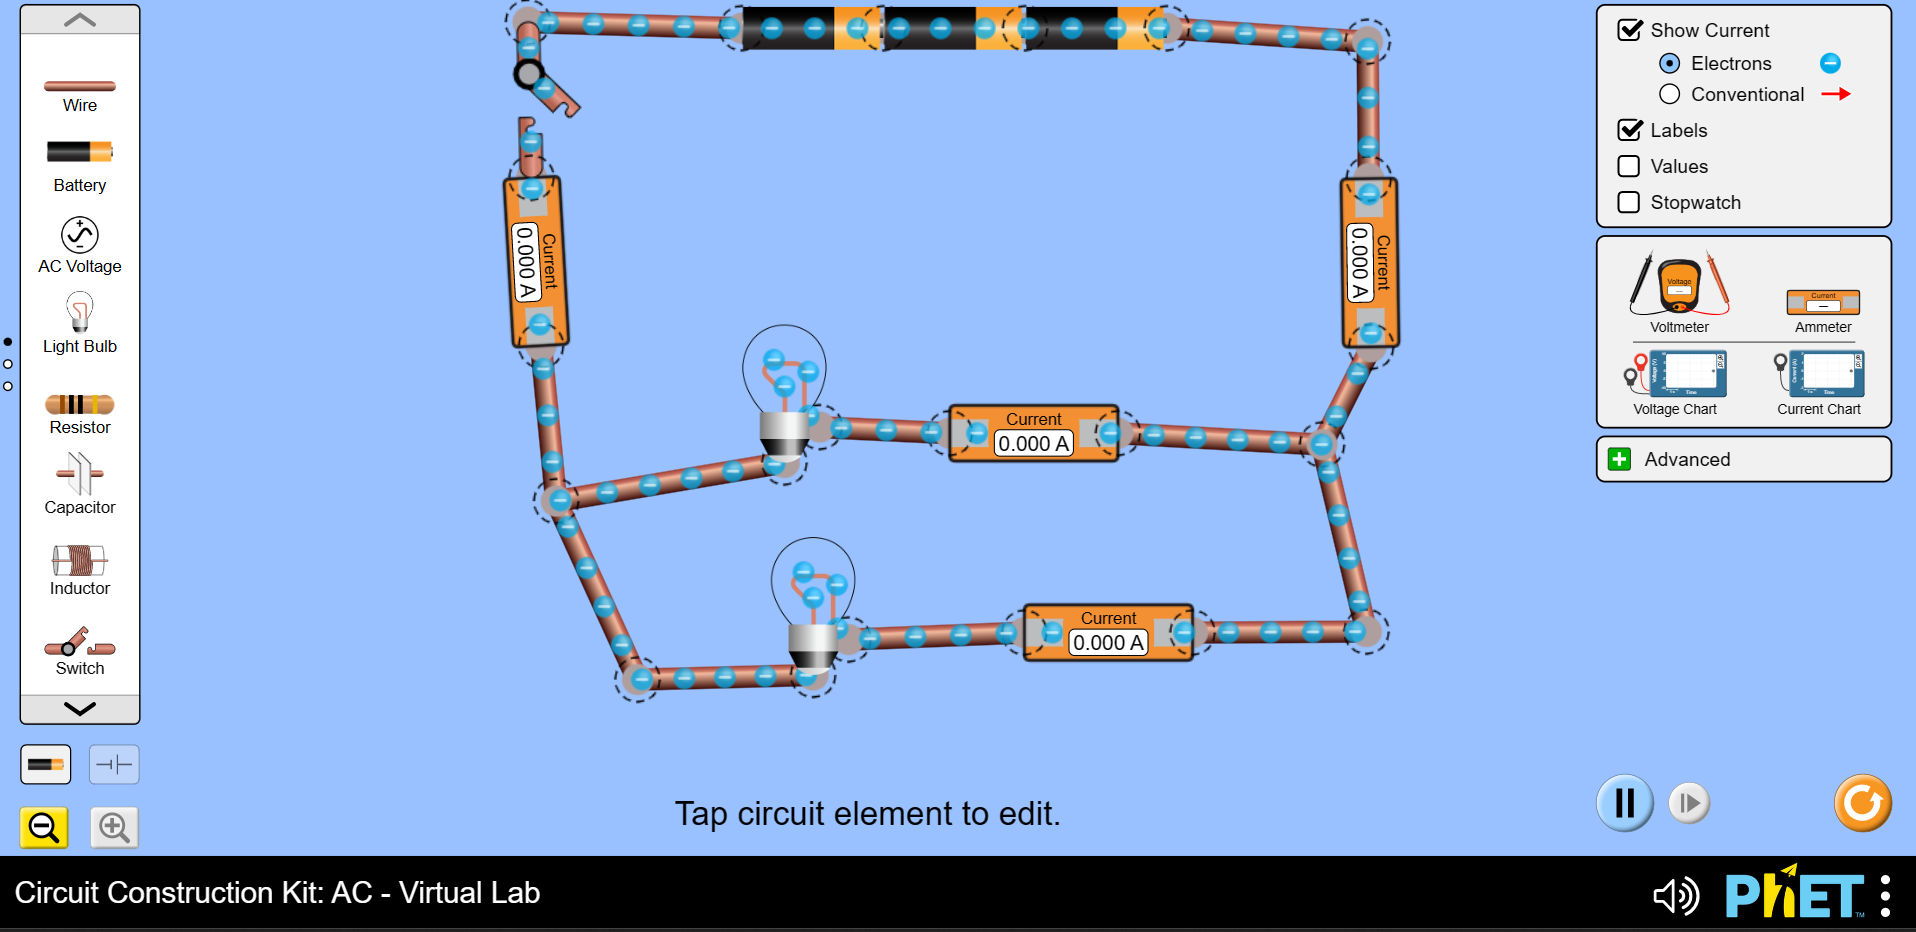 Screenshot of a Phet simulation of a parallel circuit.